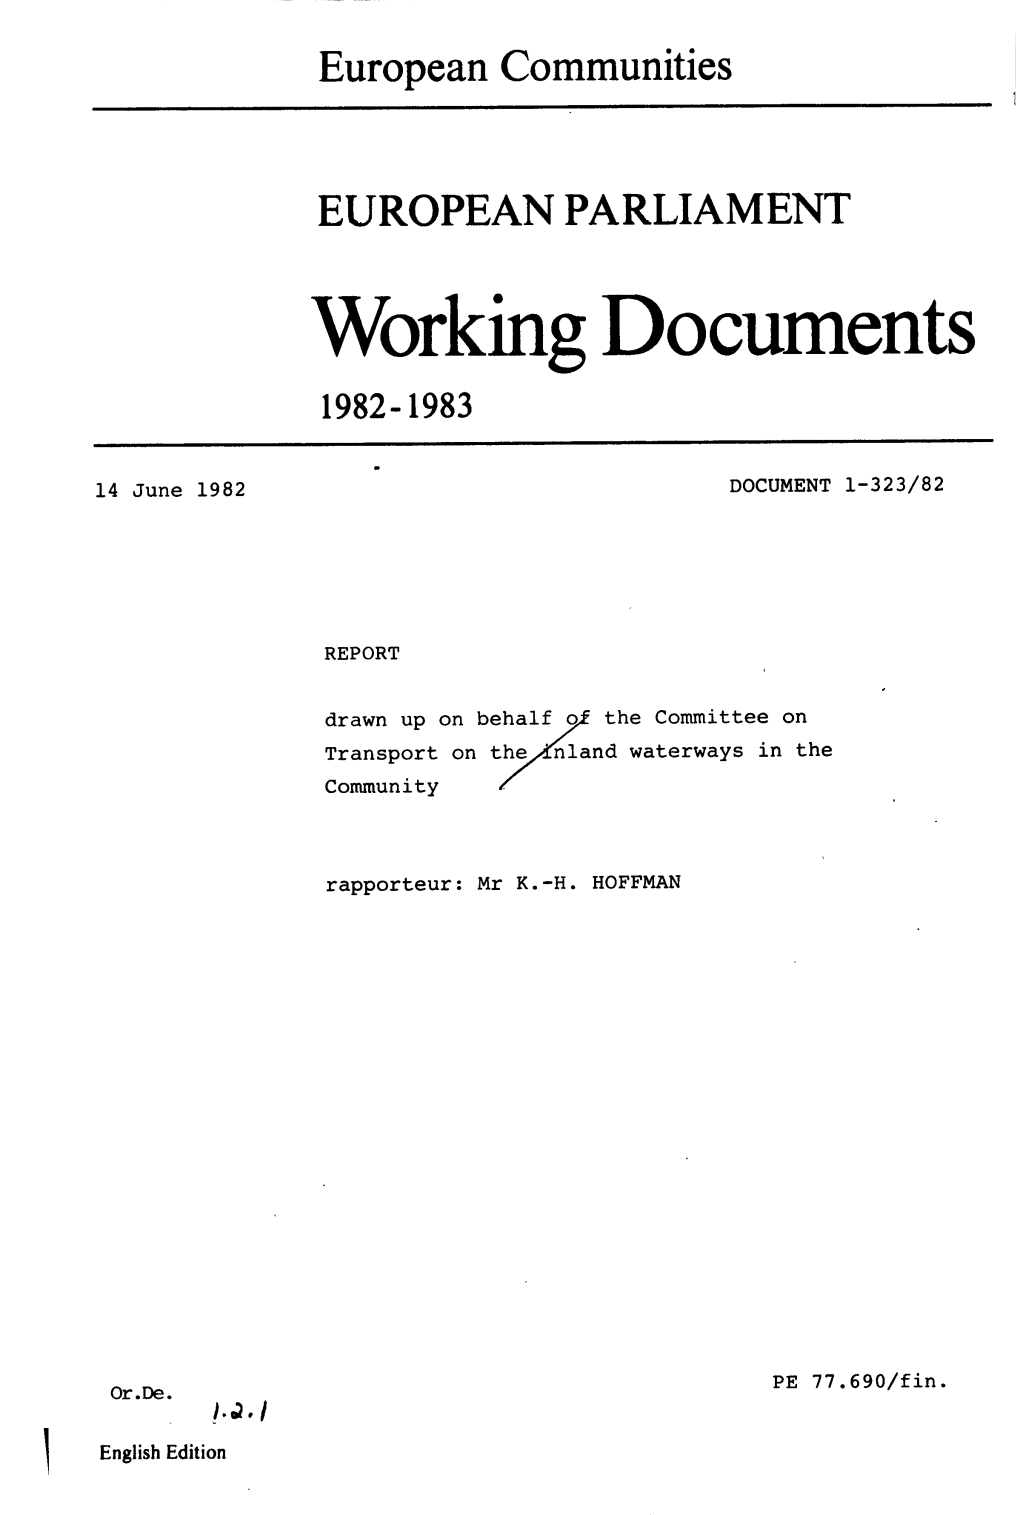 Wbrking Documents 1,982- 1983